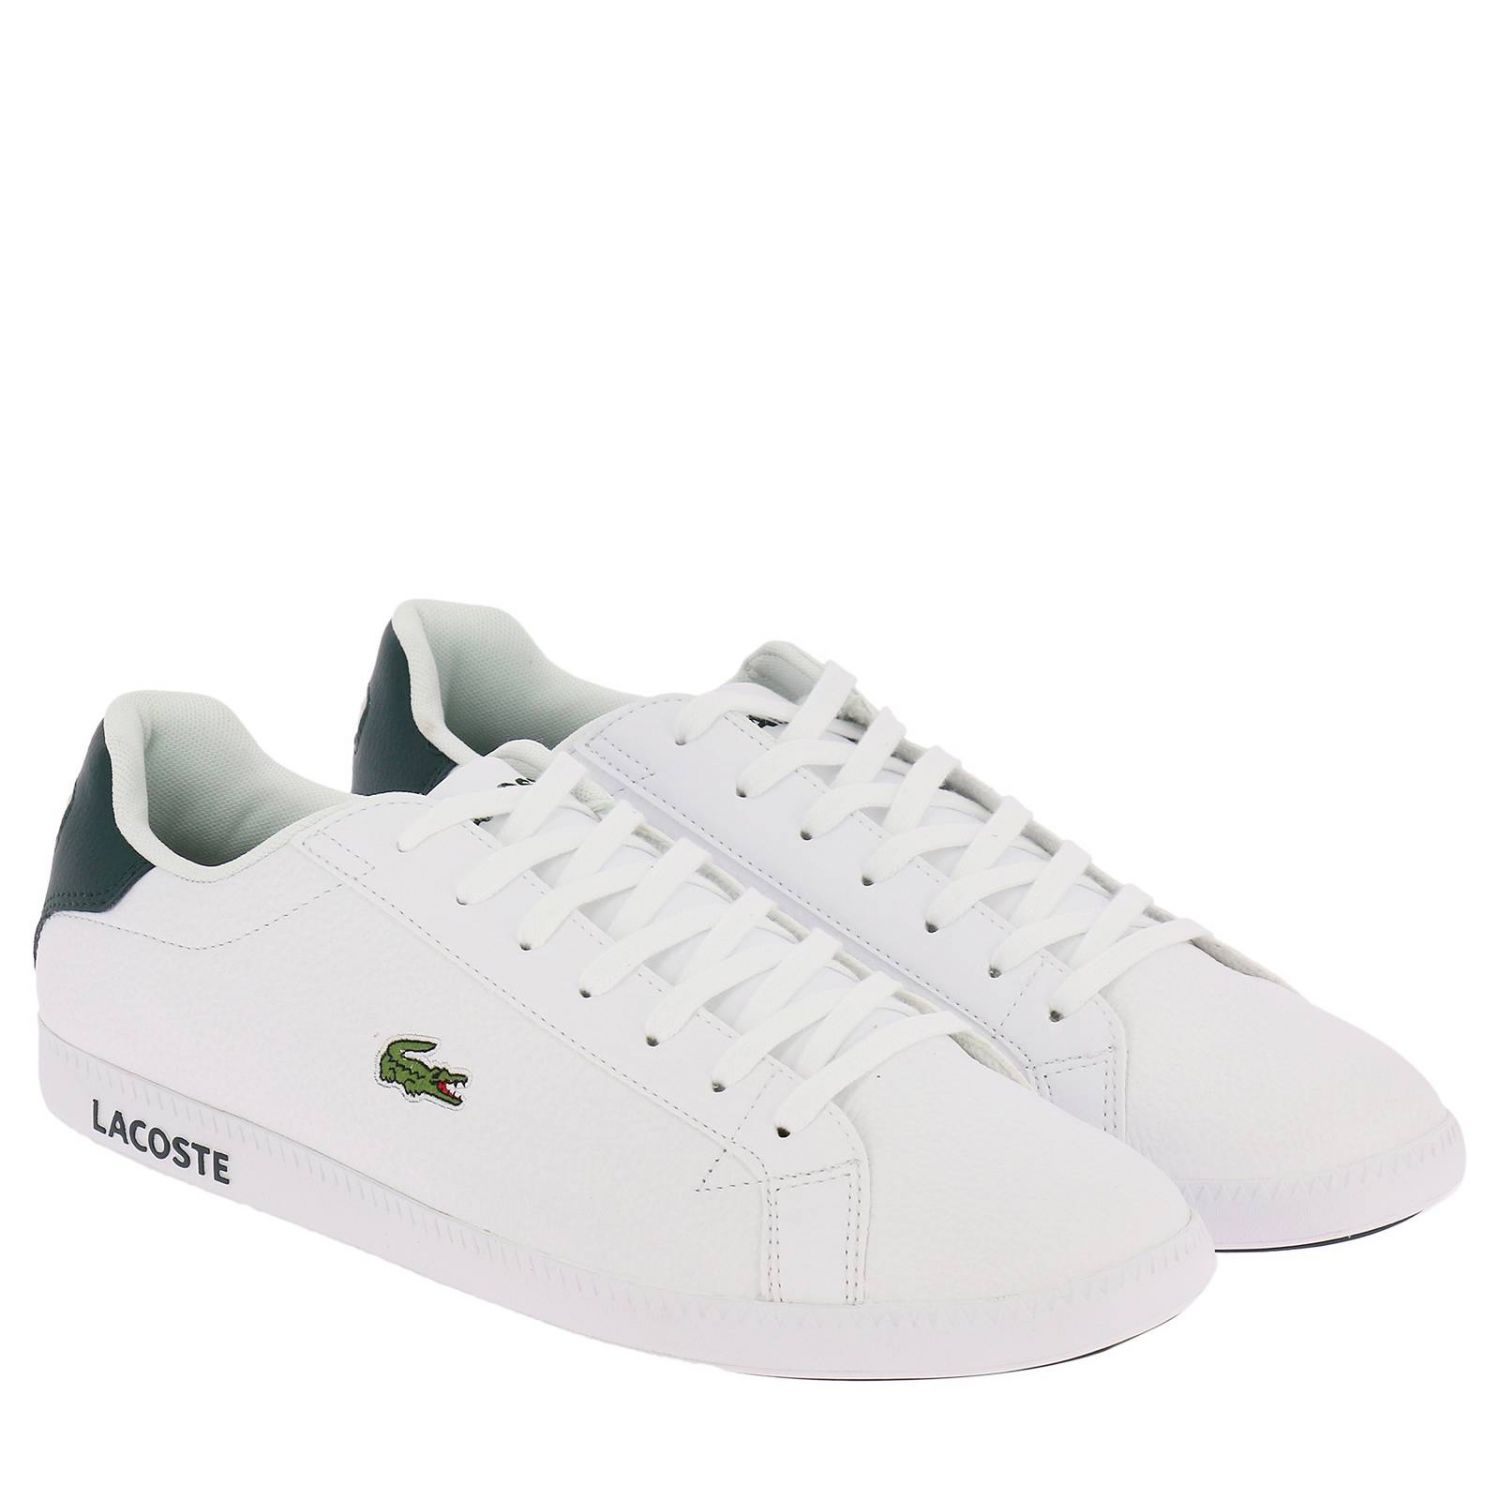 Lacoste Outlet: Shoes men - White | Sneakers Lacoste 735SPM0013 GIGLIO.COM